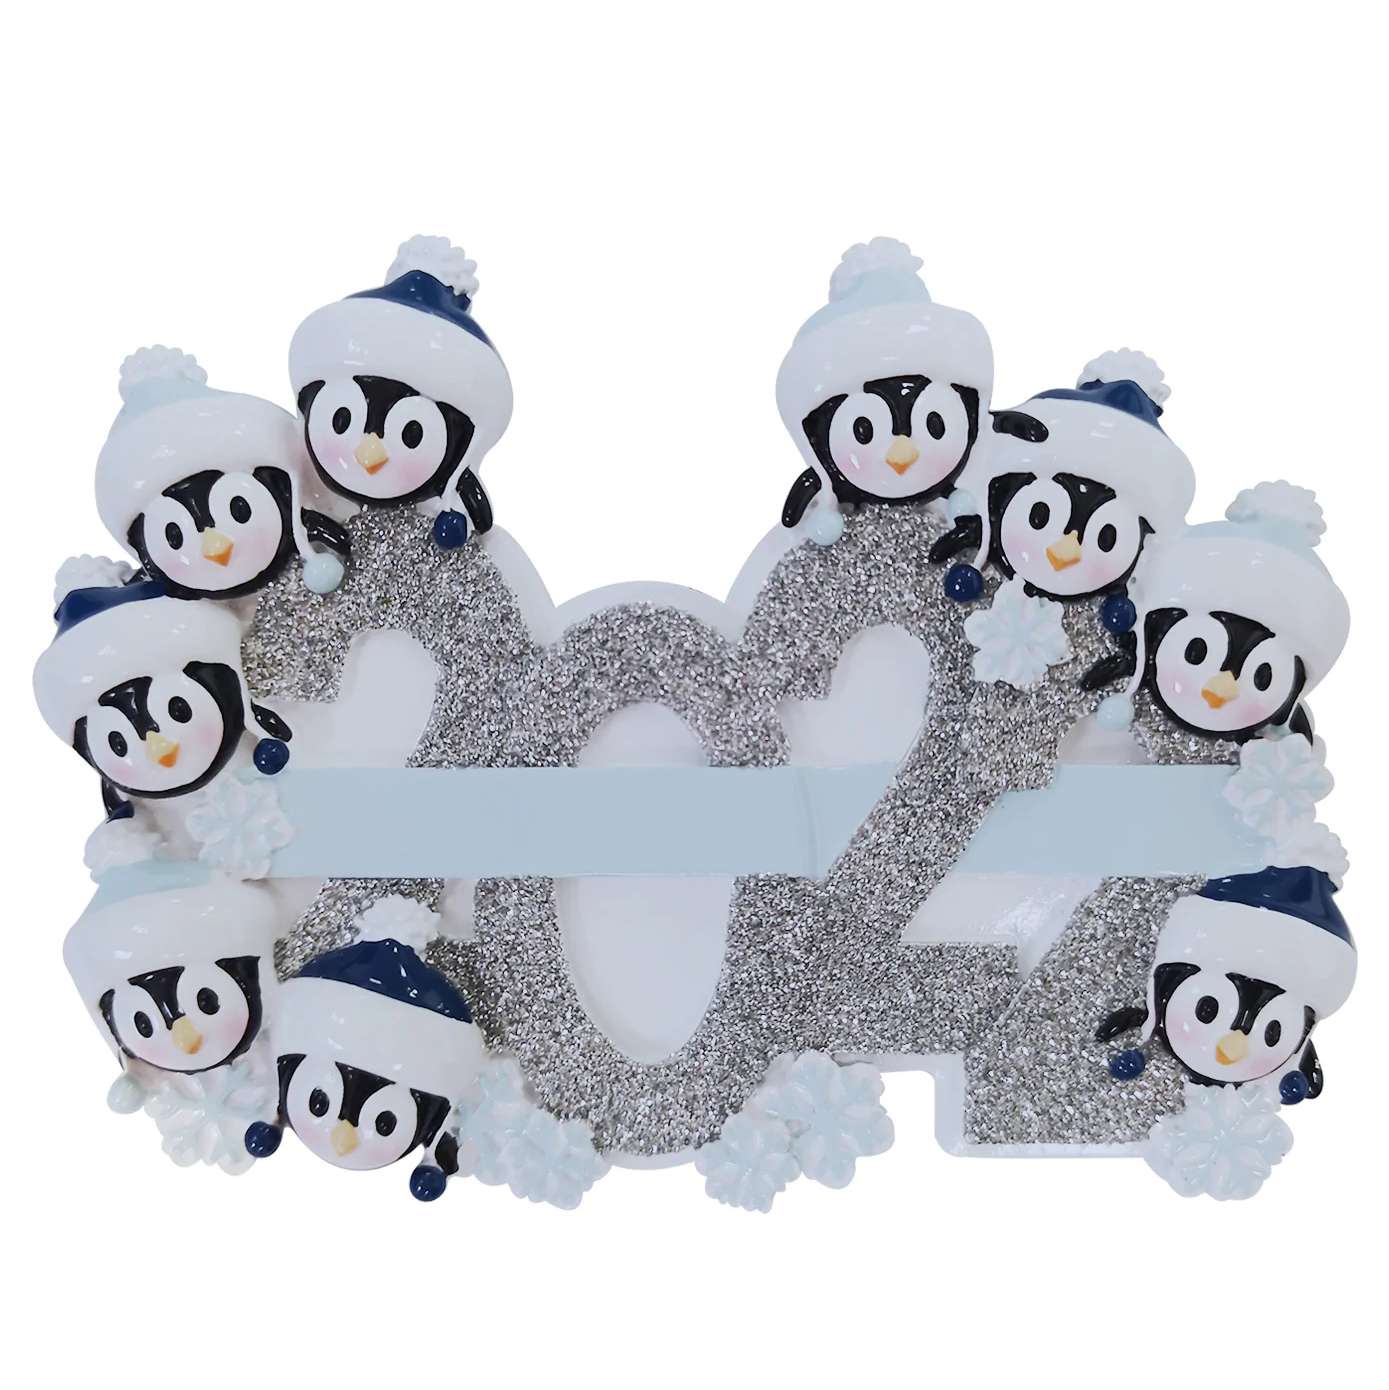 Family of Nine Penguin 2022 Family Personalized Ornament